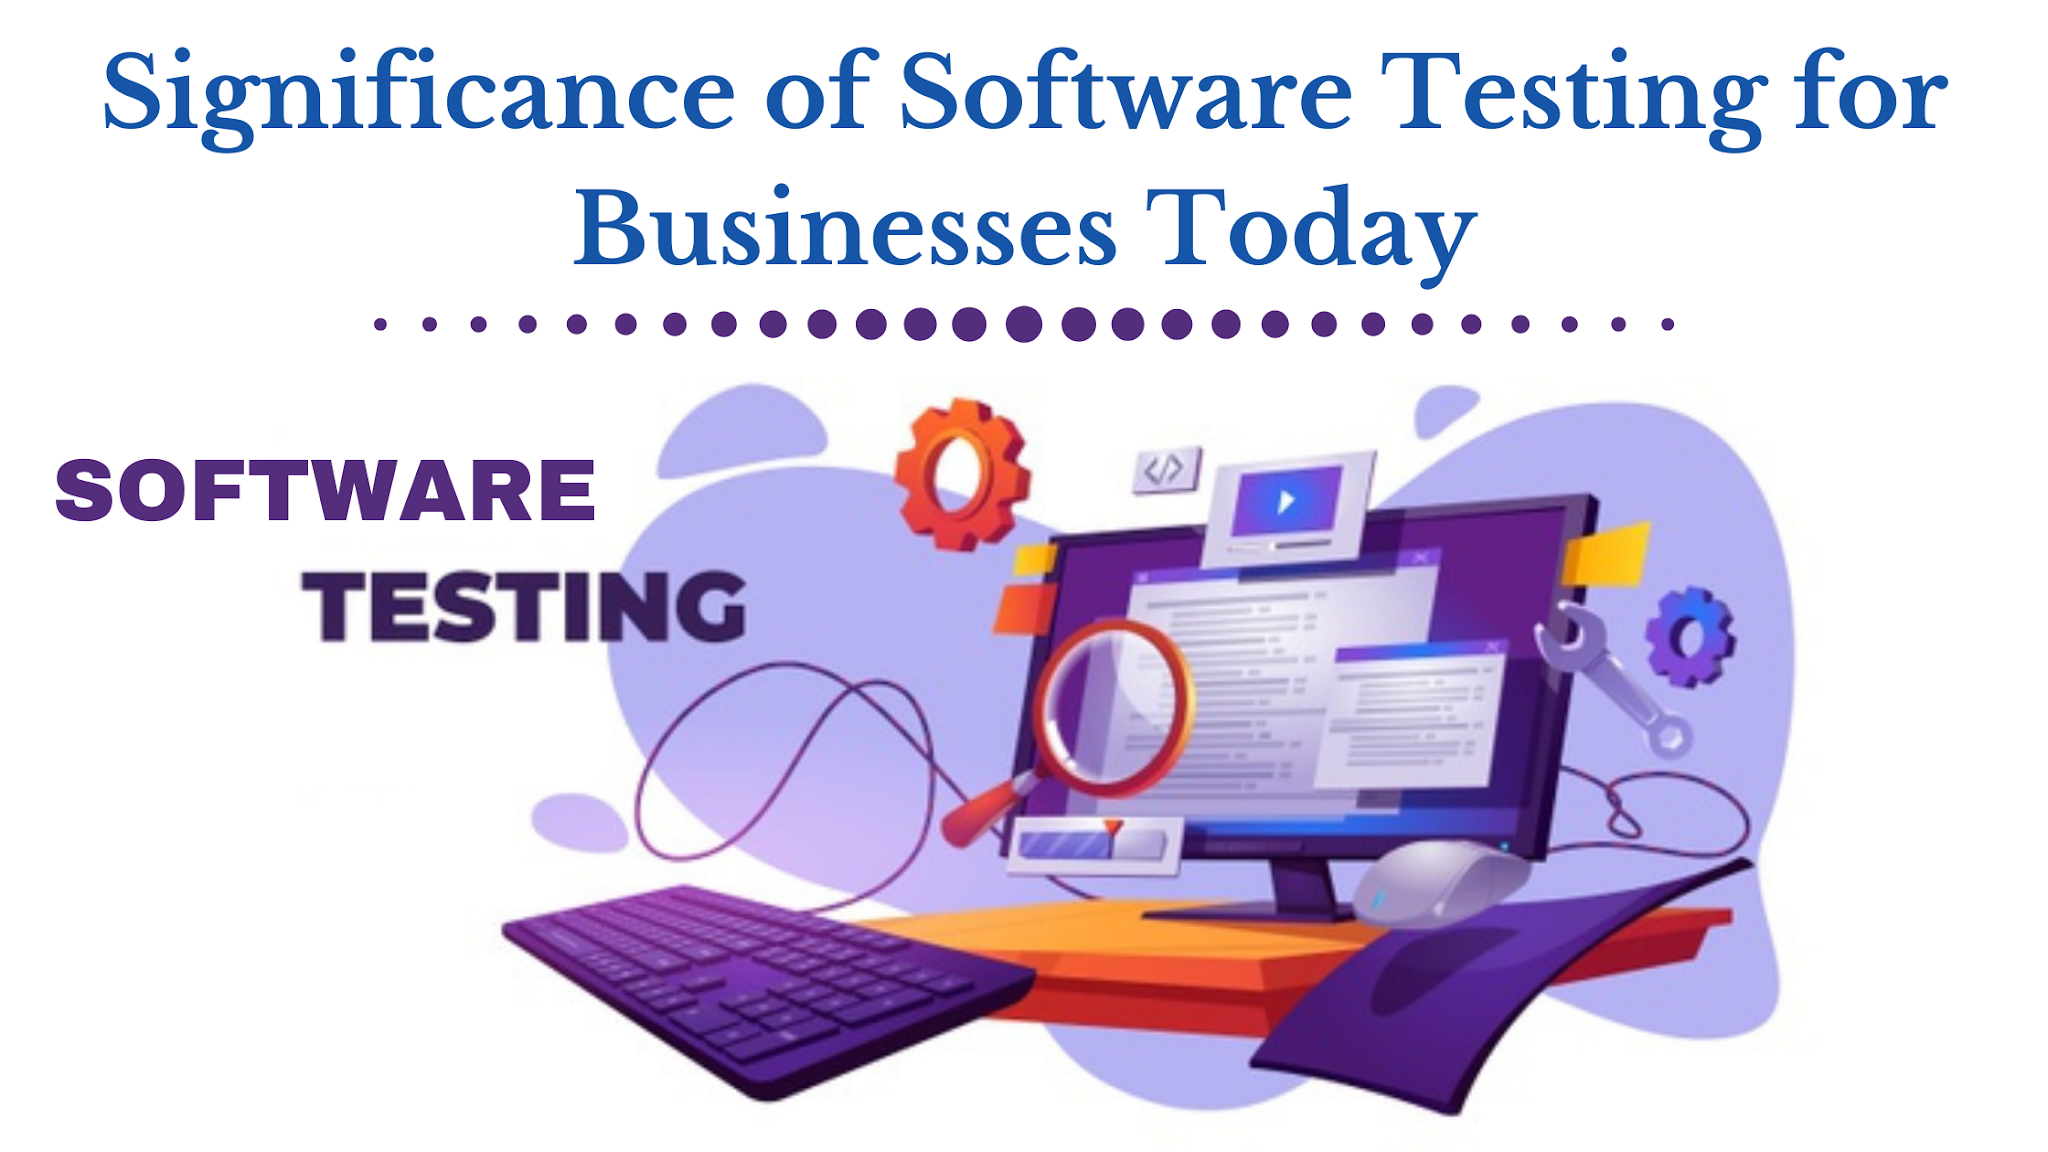 Significance of Software Testing for Businesses Today